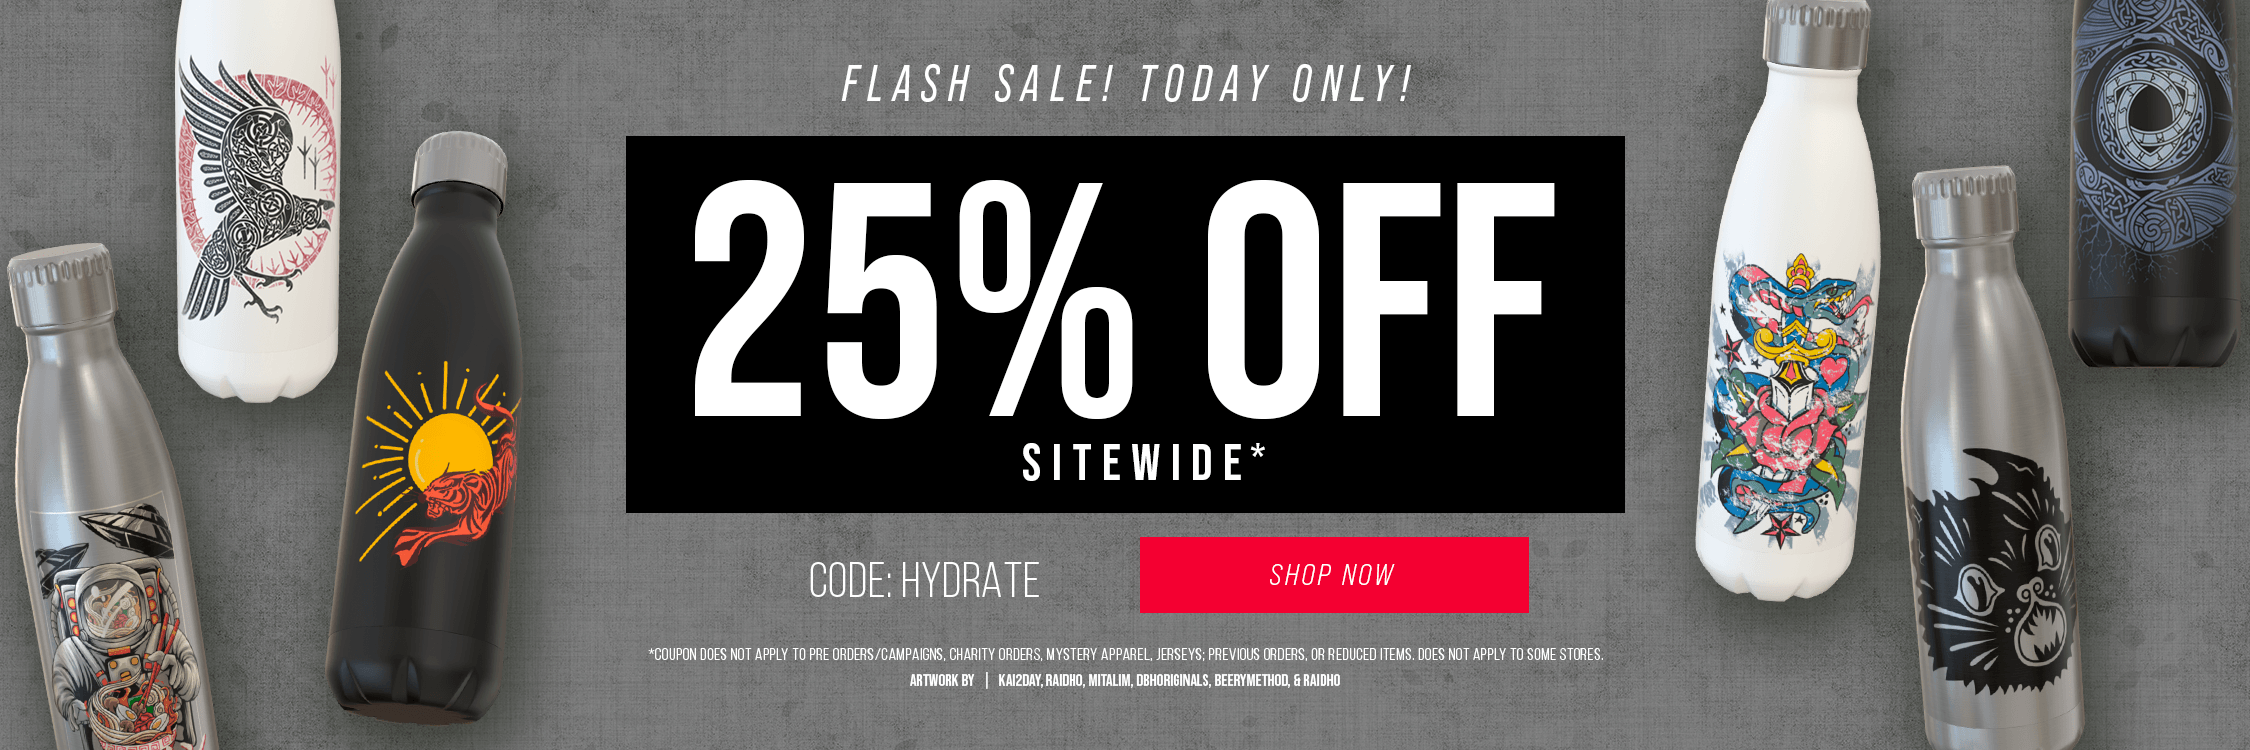 Flash Sale. Today Only. 25% off sitewide. Code Hydrate. Shop Now. Exclusions Apply. Bottle graphic.